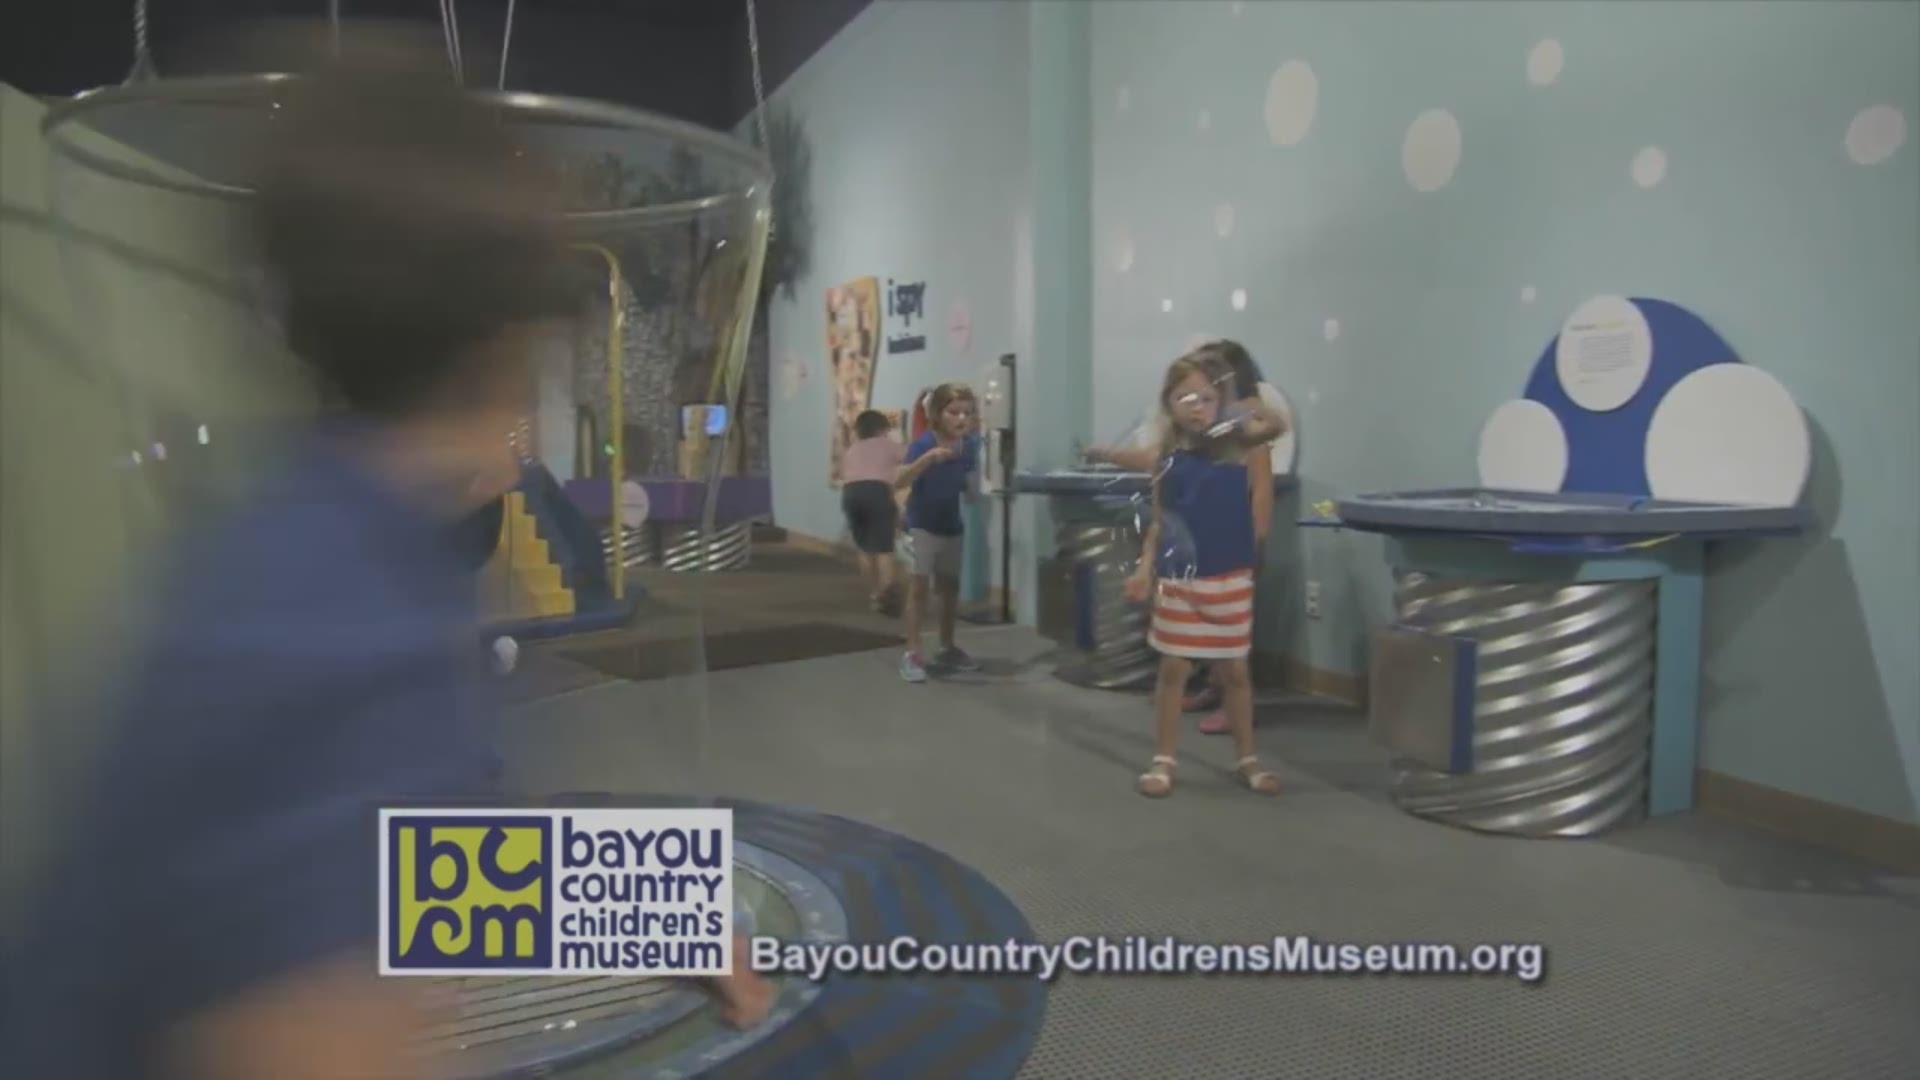 A look at great places to visit on a tank of gas or less - Bayou Country Children's Museum.